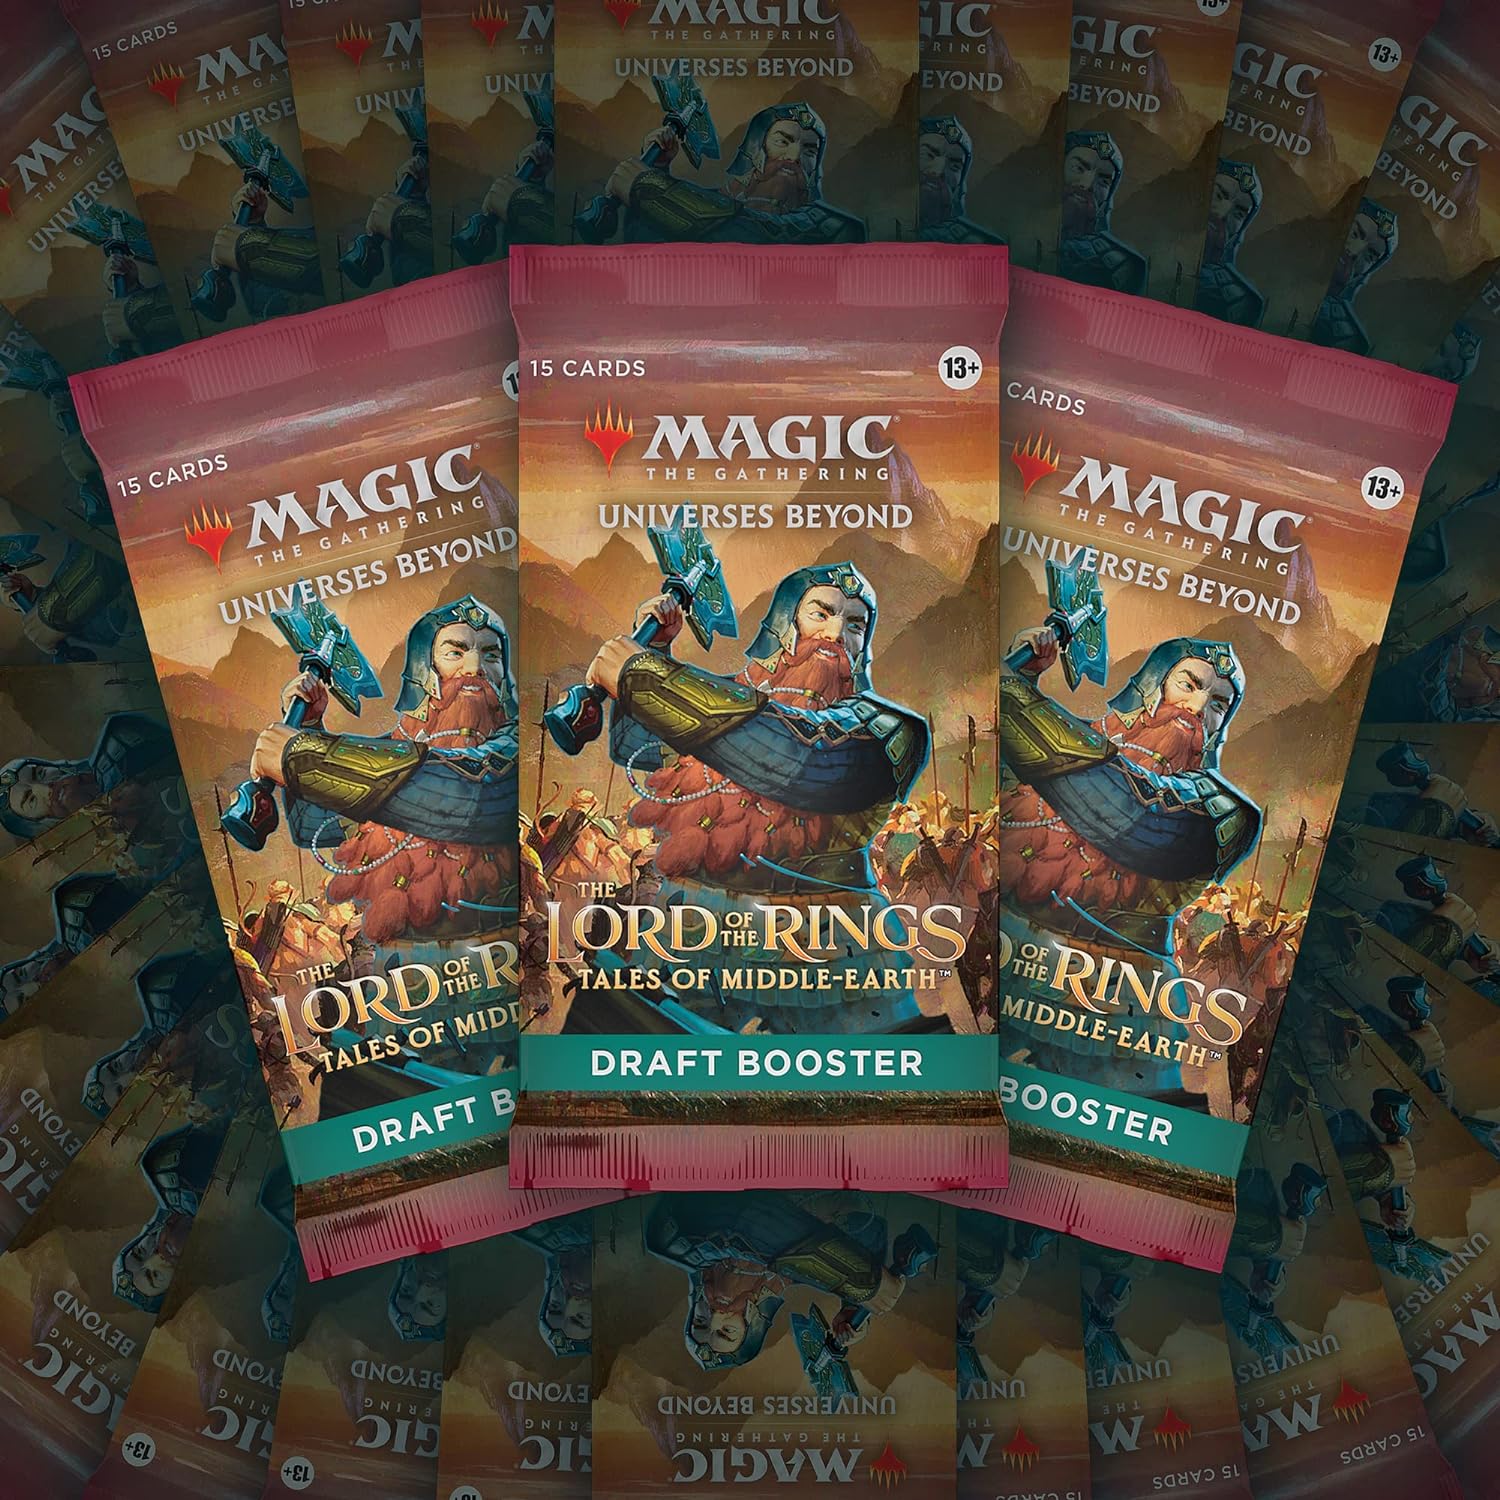 Magic the Gathering: The Lord of The Rings: Tales of Middle-Earth Draft Booster Packs & Box